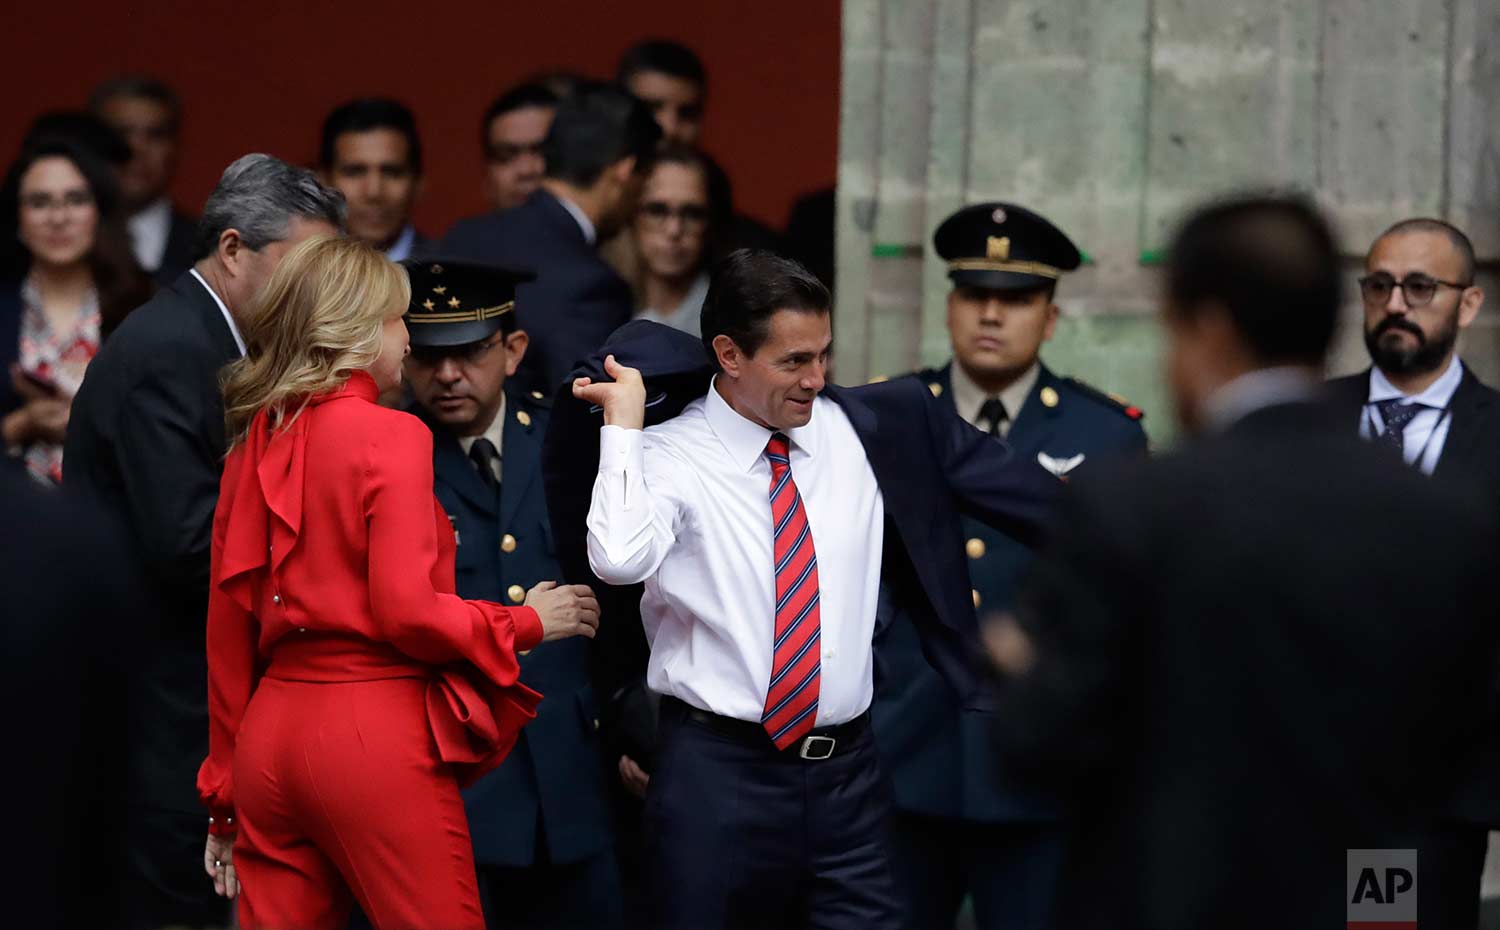  Mexican President Enrique Pena Nieto puts on his jacket as his wife Angelica Rivera looks on before welcoming Canadian Prime Minister Justin Trudeau and his wife Sophie Gregoire Trudeau to the National Palace in Mexico City, Thursday, Oct. 12, 2017.  (AP Photo/Rebecca Blackwell) 